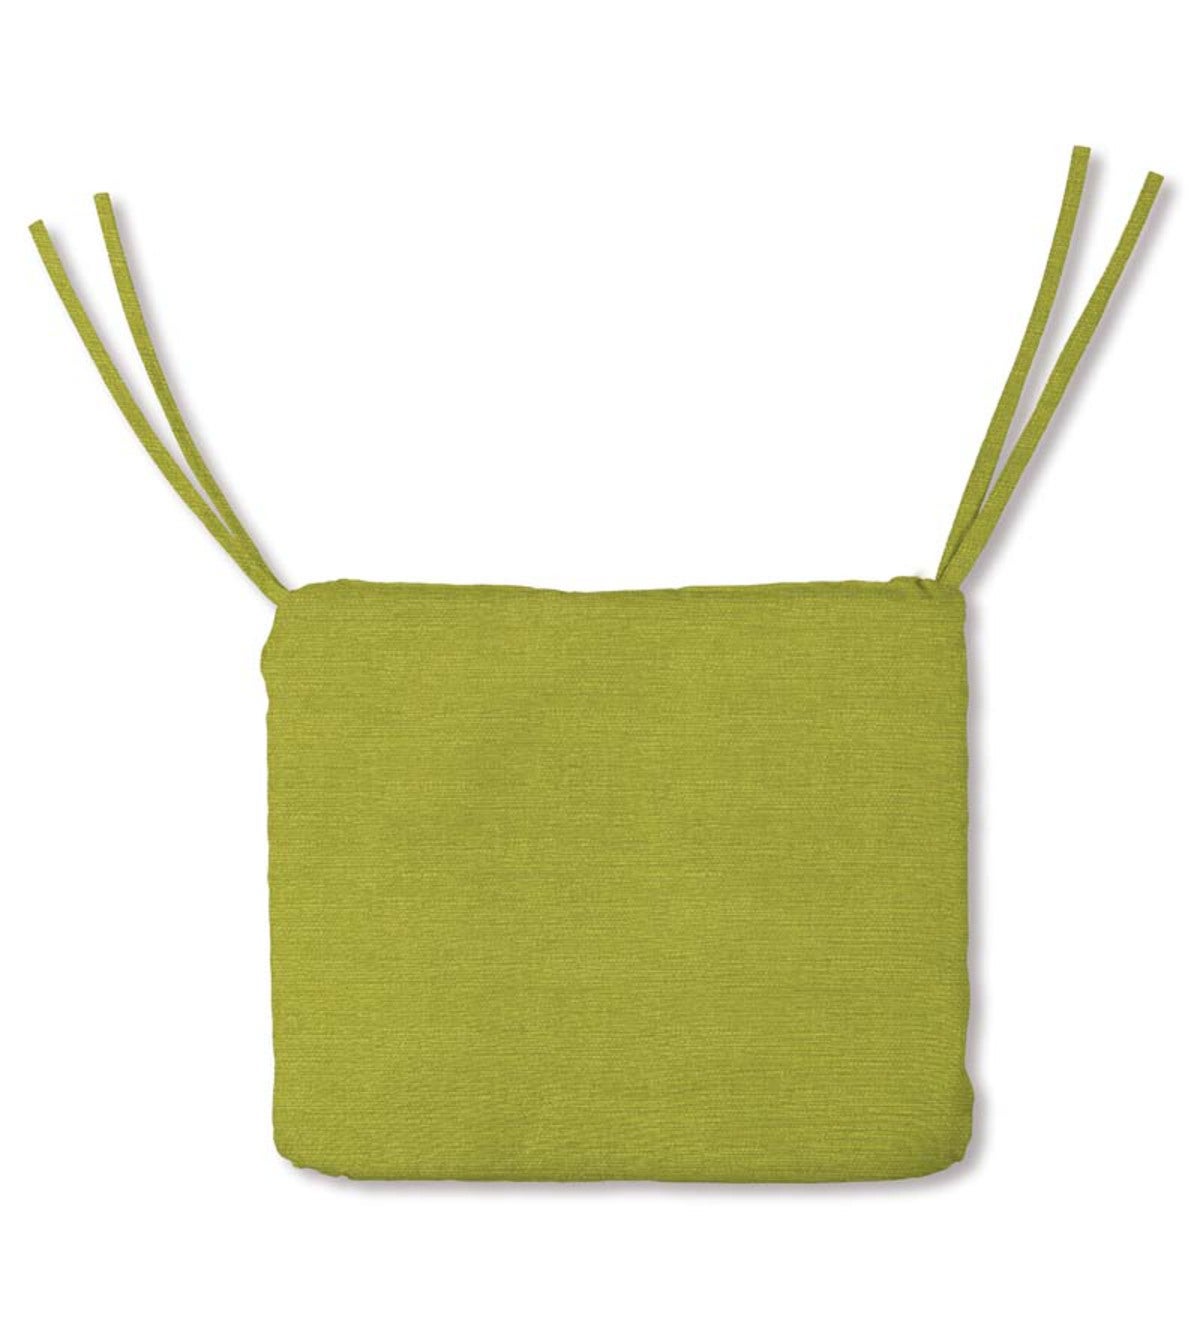 Sale! Polyester Classic Chair Cushions With Ties, 17¾”x 15¼”x 3” - Lime Green